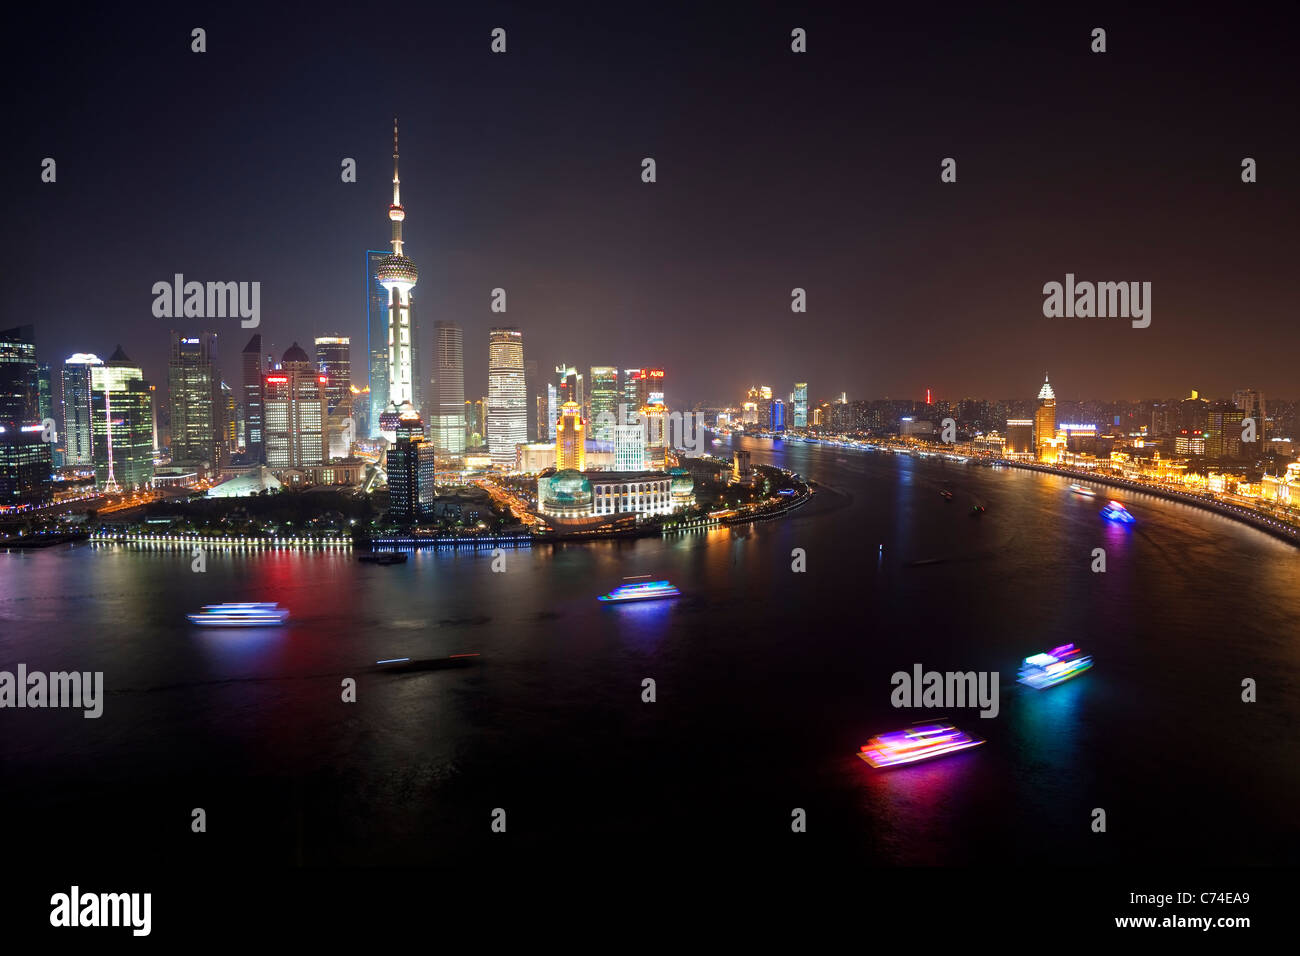 New Pudong skyline looking across the Huangpu River from the Bund, Shanghai, China Stock Photo